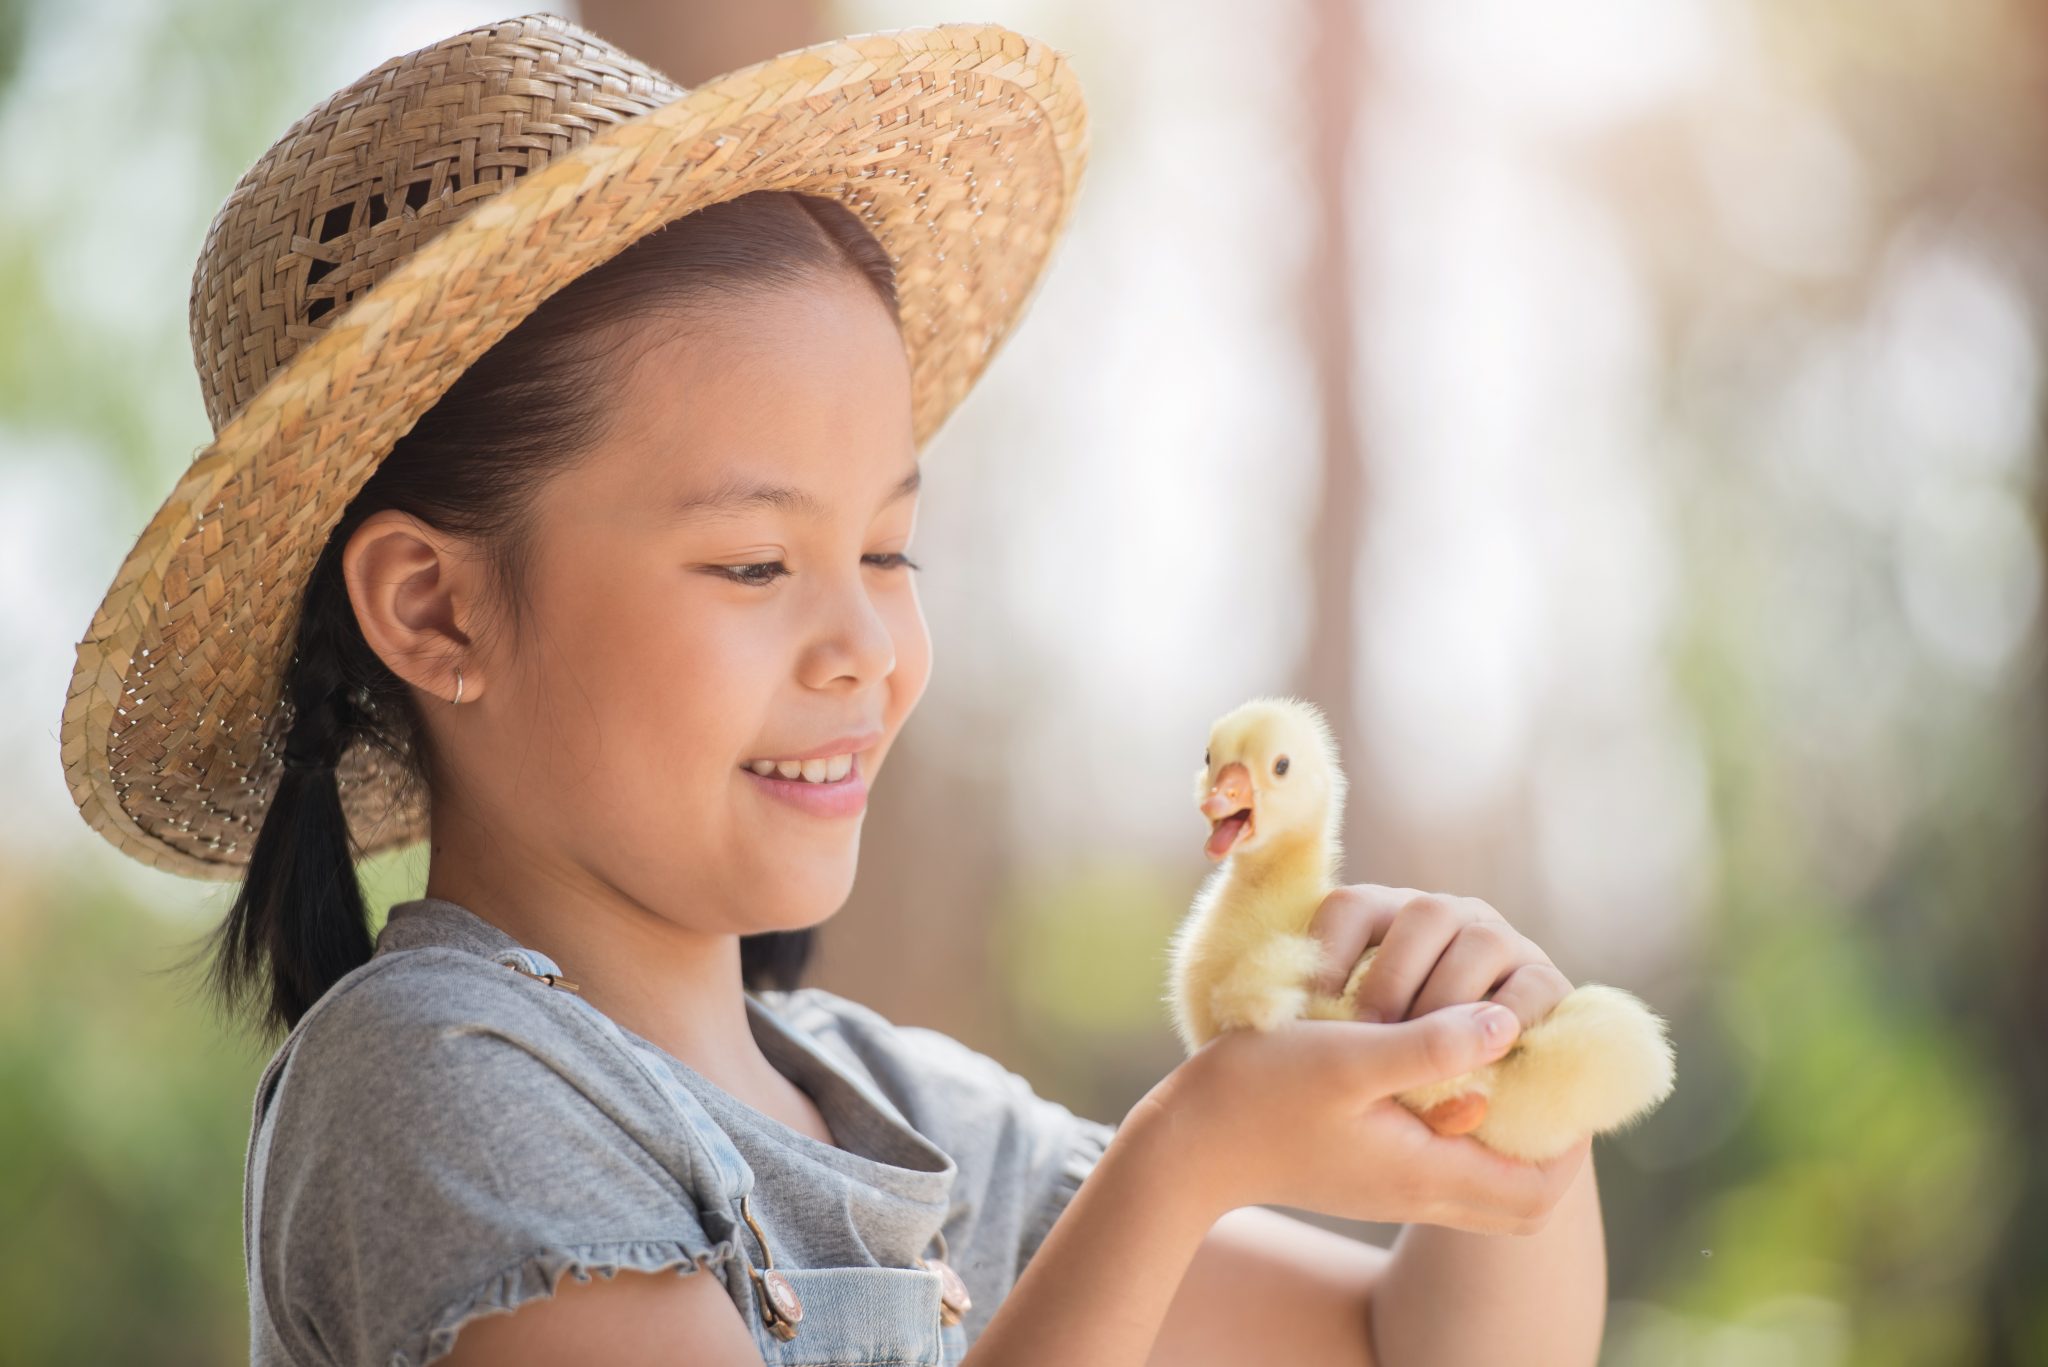 Young girl with a duckling in her hand